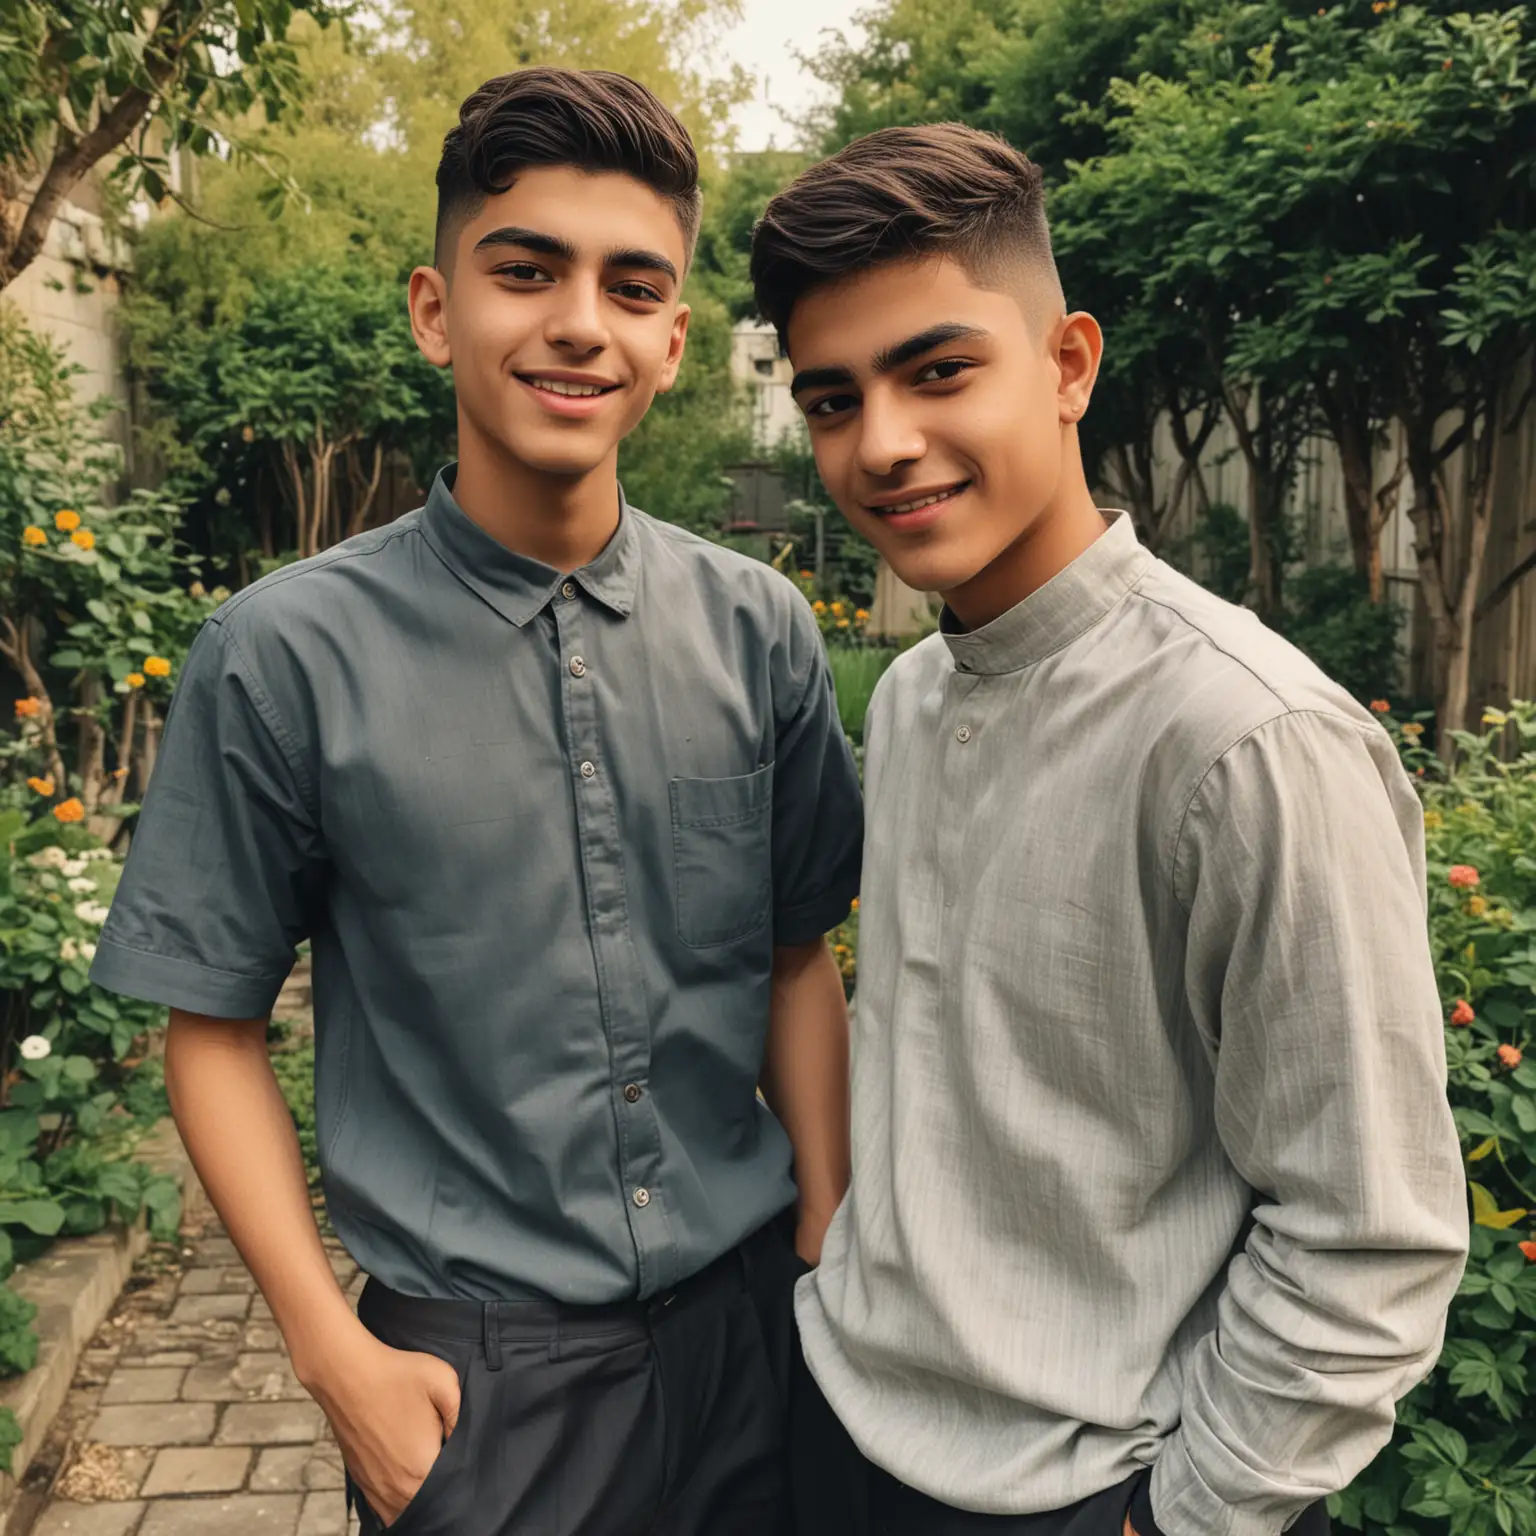 two brothers, one is around 20 years old, the other is around 14 years old, theyre race is persian, they have skin fade haircuts, they are wearing modern clothes, they are outside having fun in a garden
